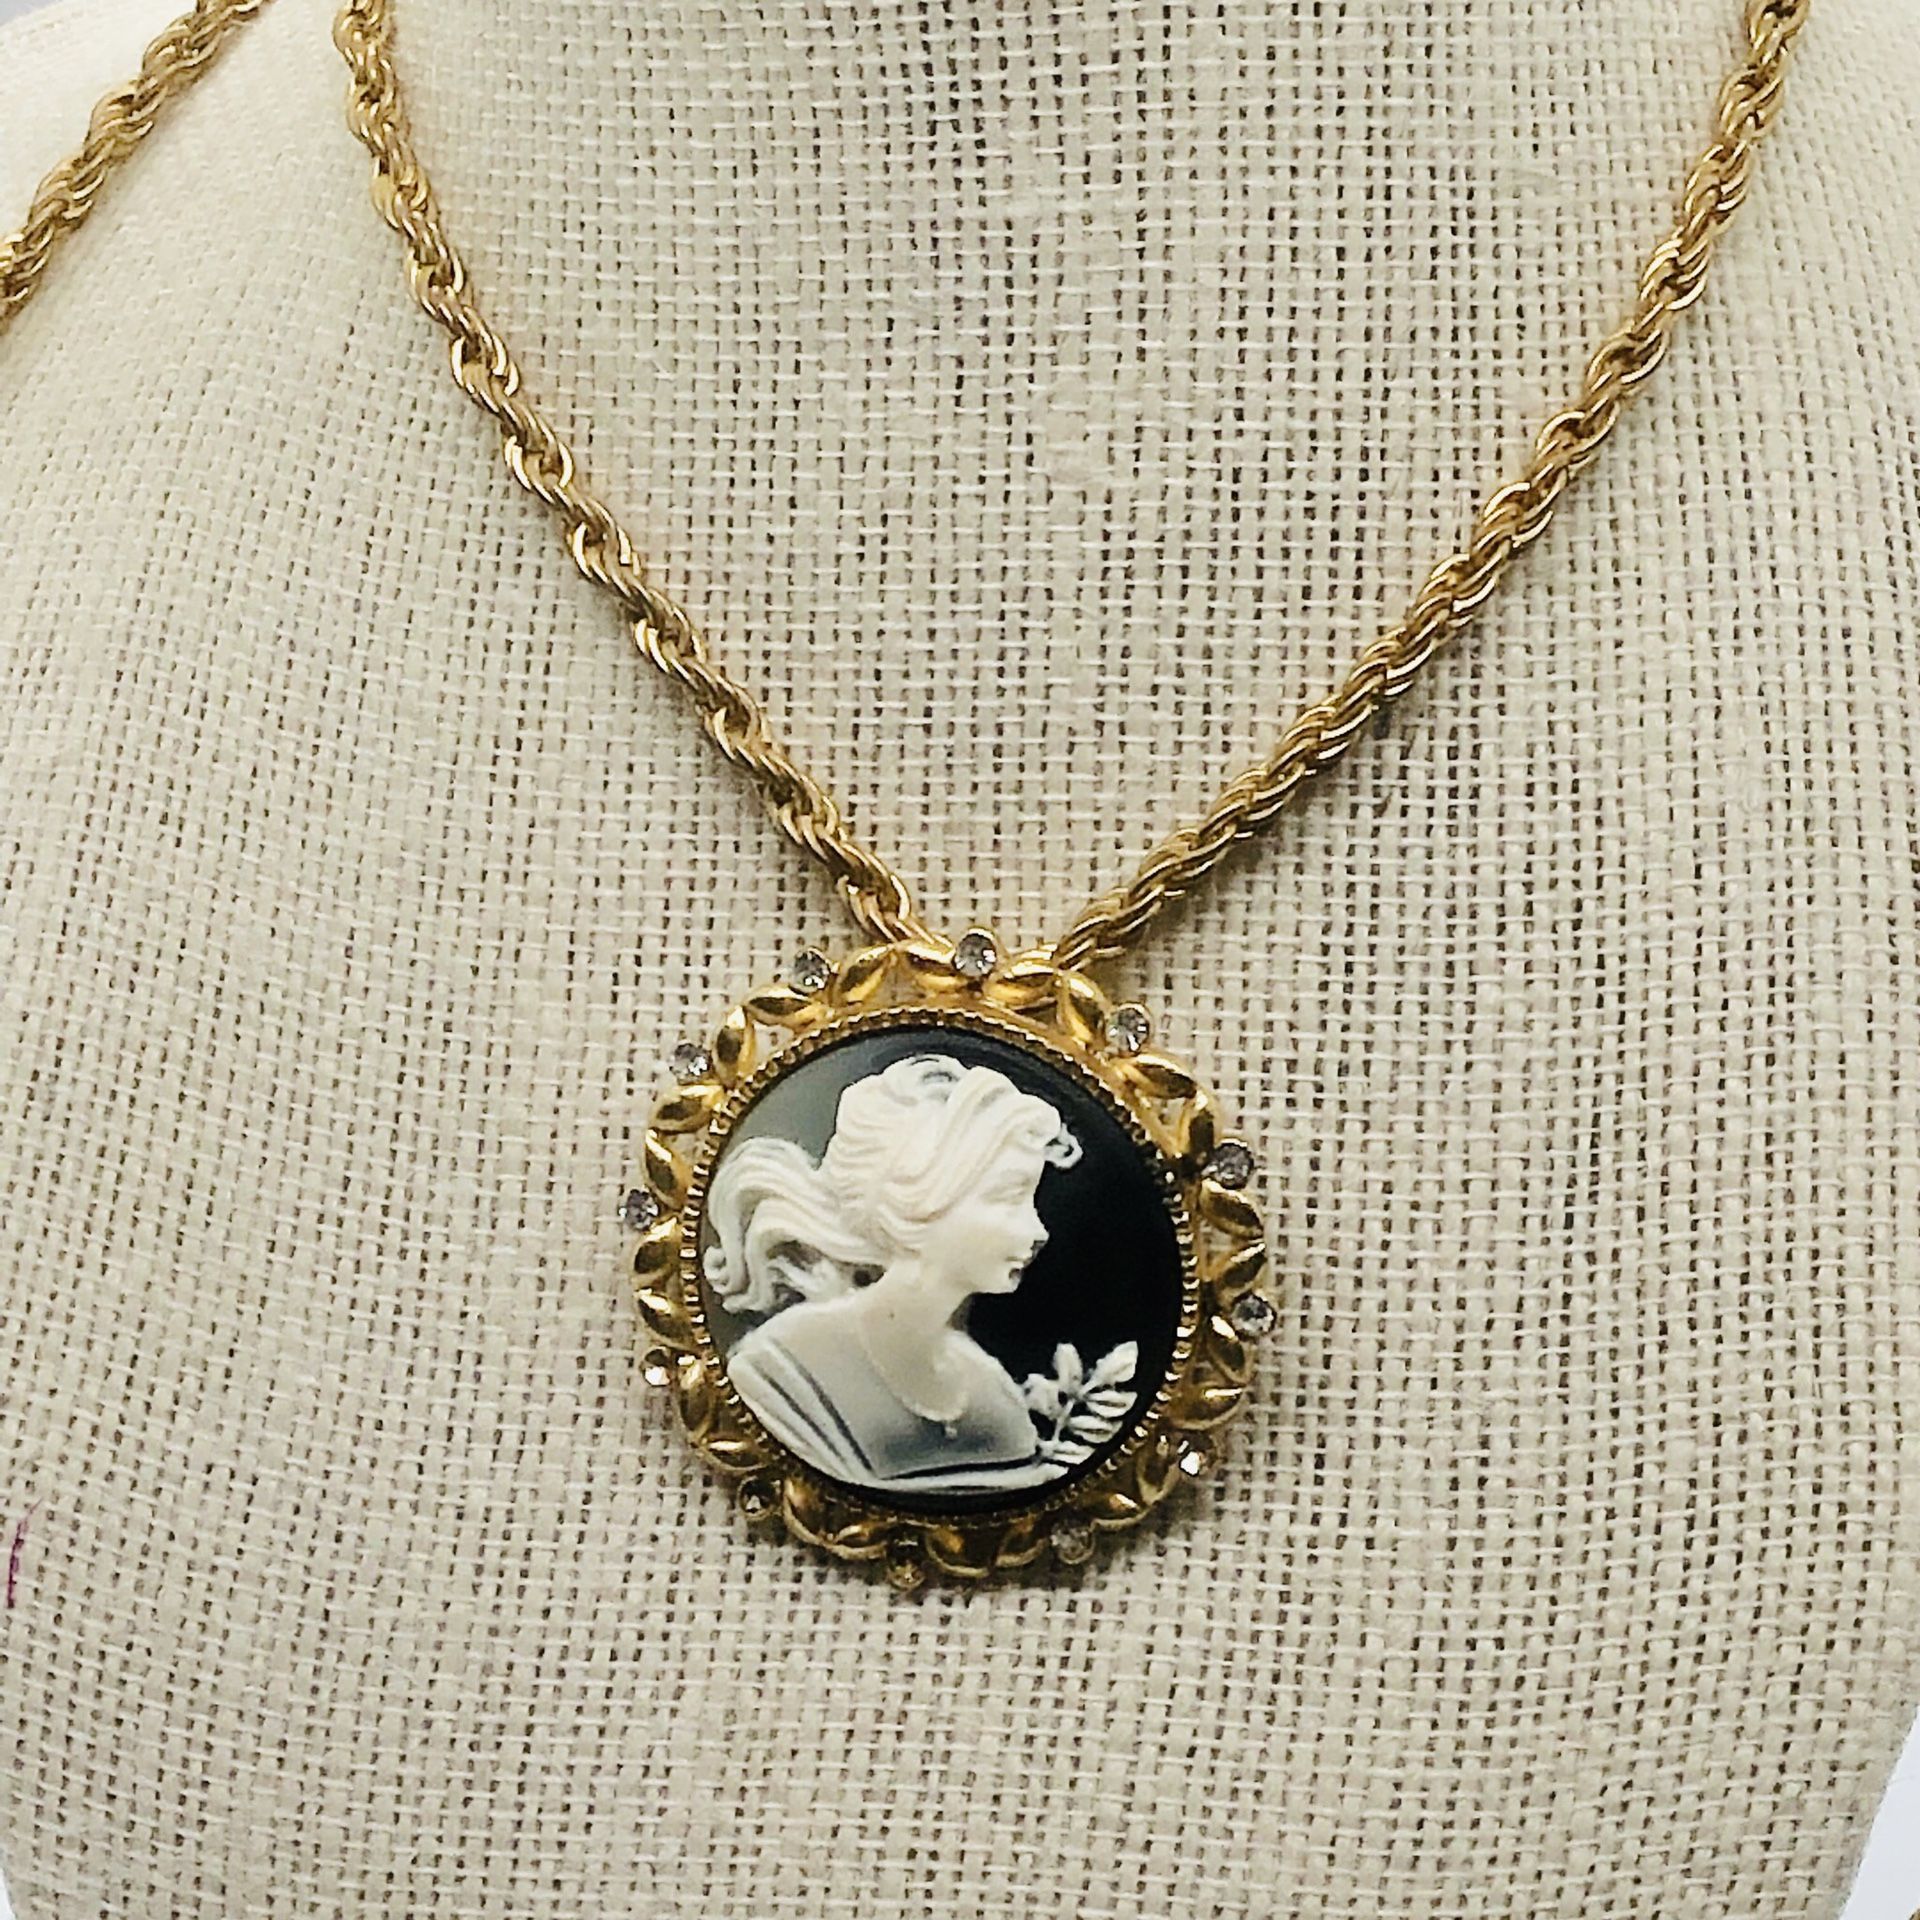 Vintage Fashion gold tone necklace with cameo